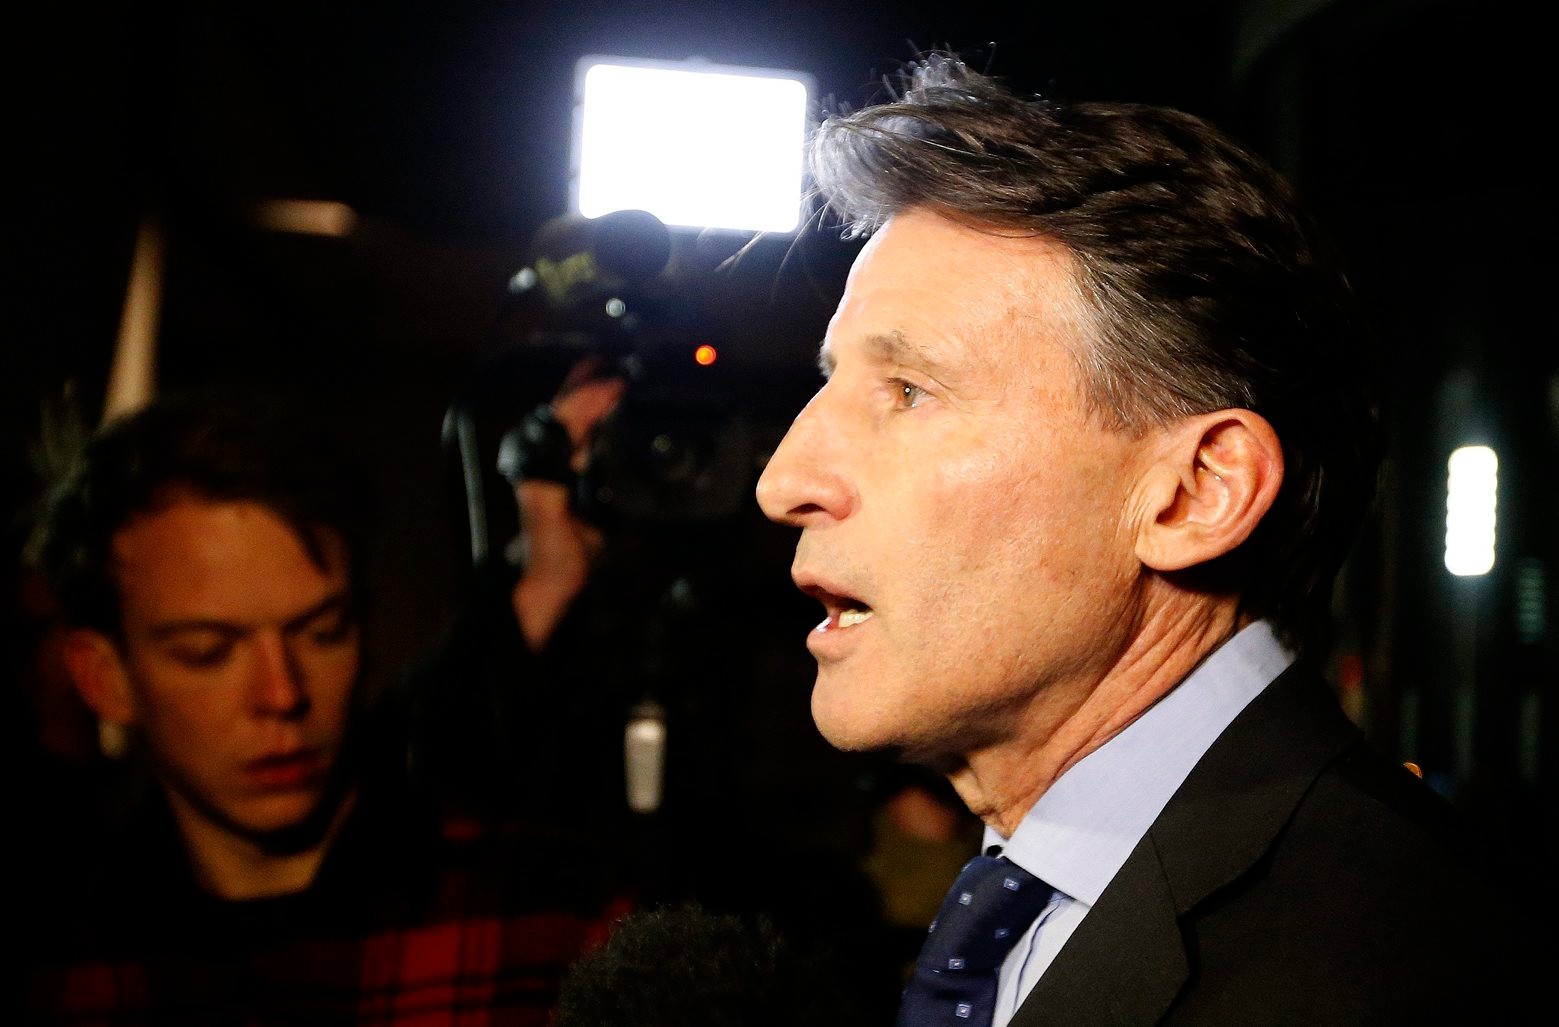 IAAF President Sebastian Coe gives a statement to journalists outside his office in London, Friday, Nov. 13, 2015. Russia's track and field federation has been suspended by governing body IAAF.(AP Photo/Frank Augstein) Britain IAAF